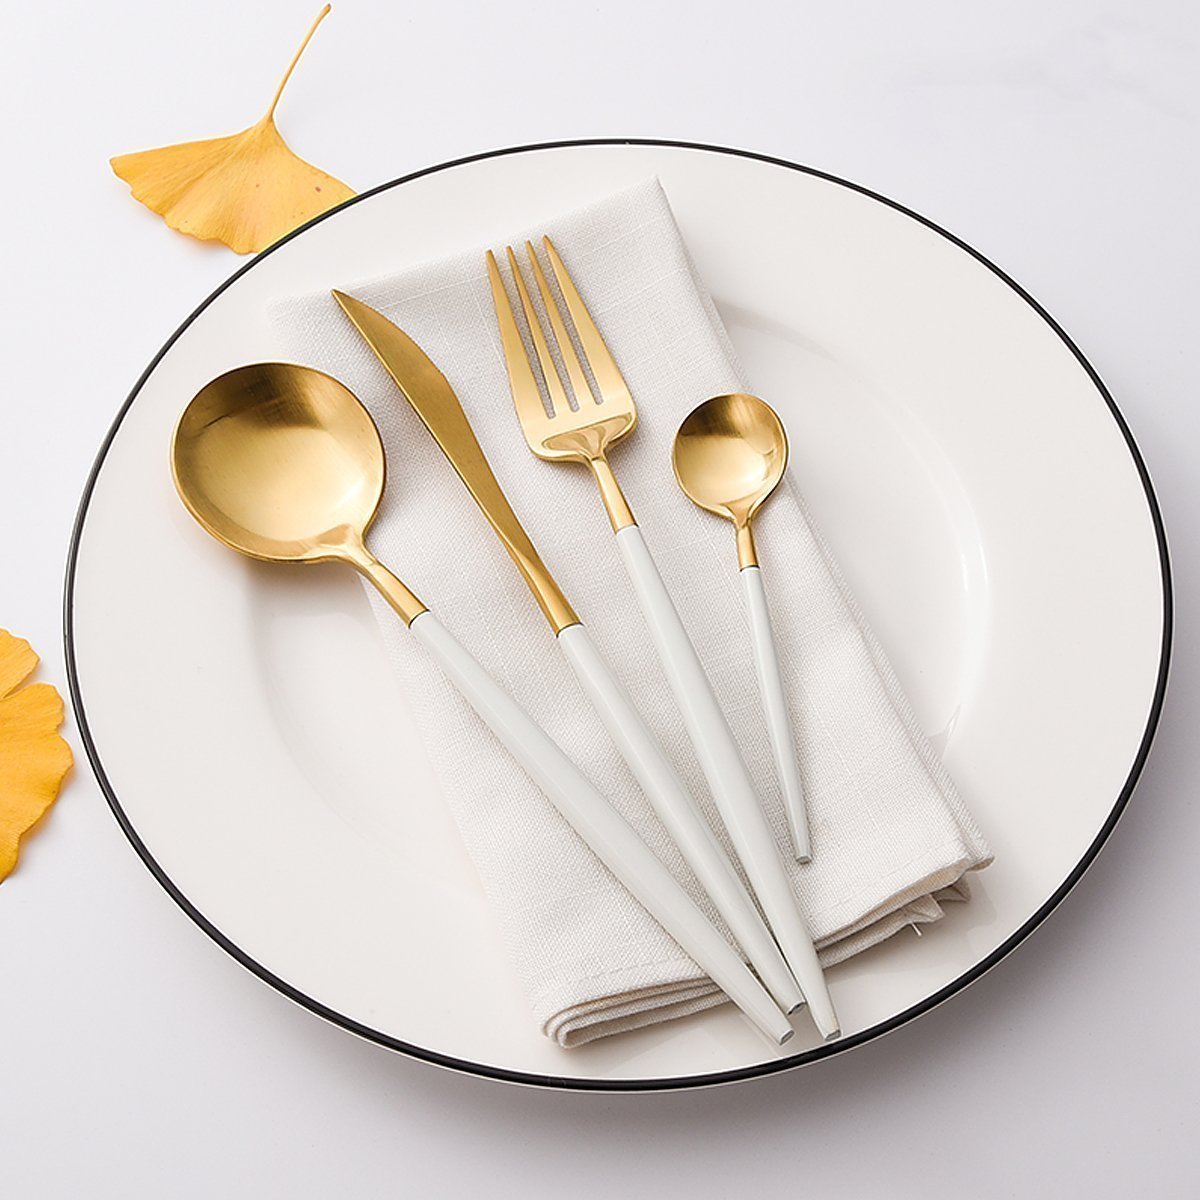 Change up your flatware for Spring!